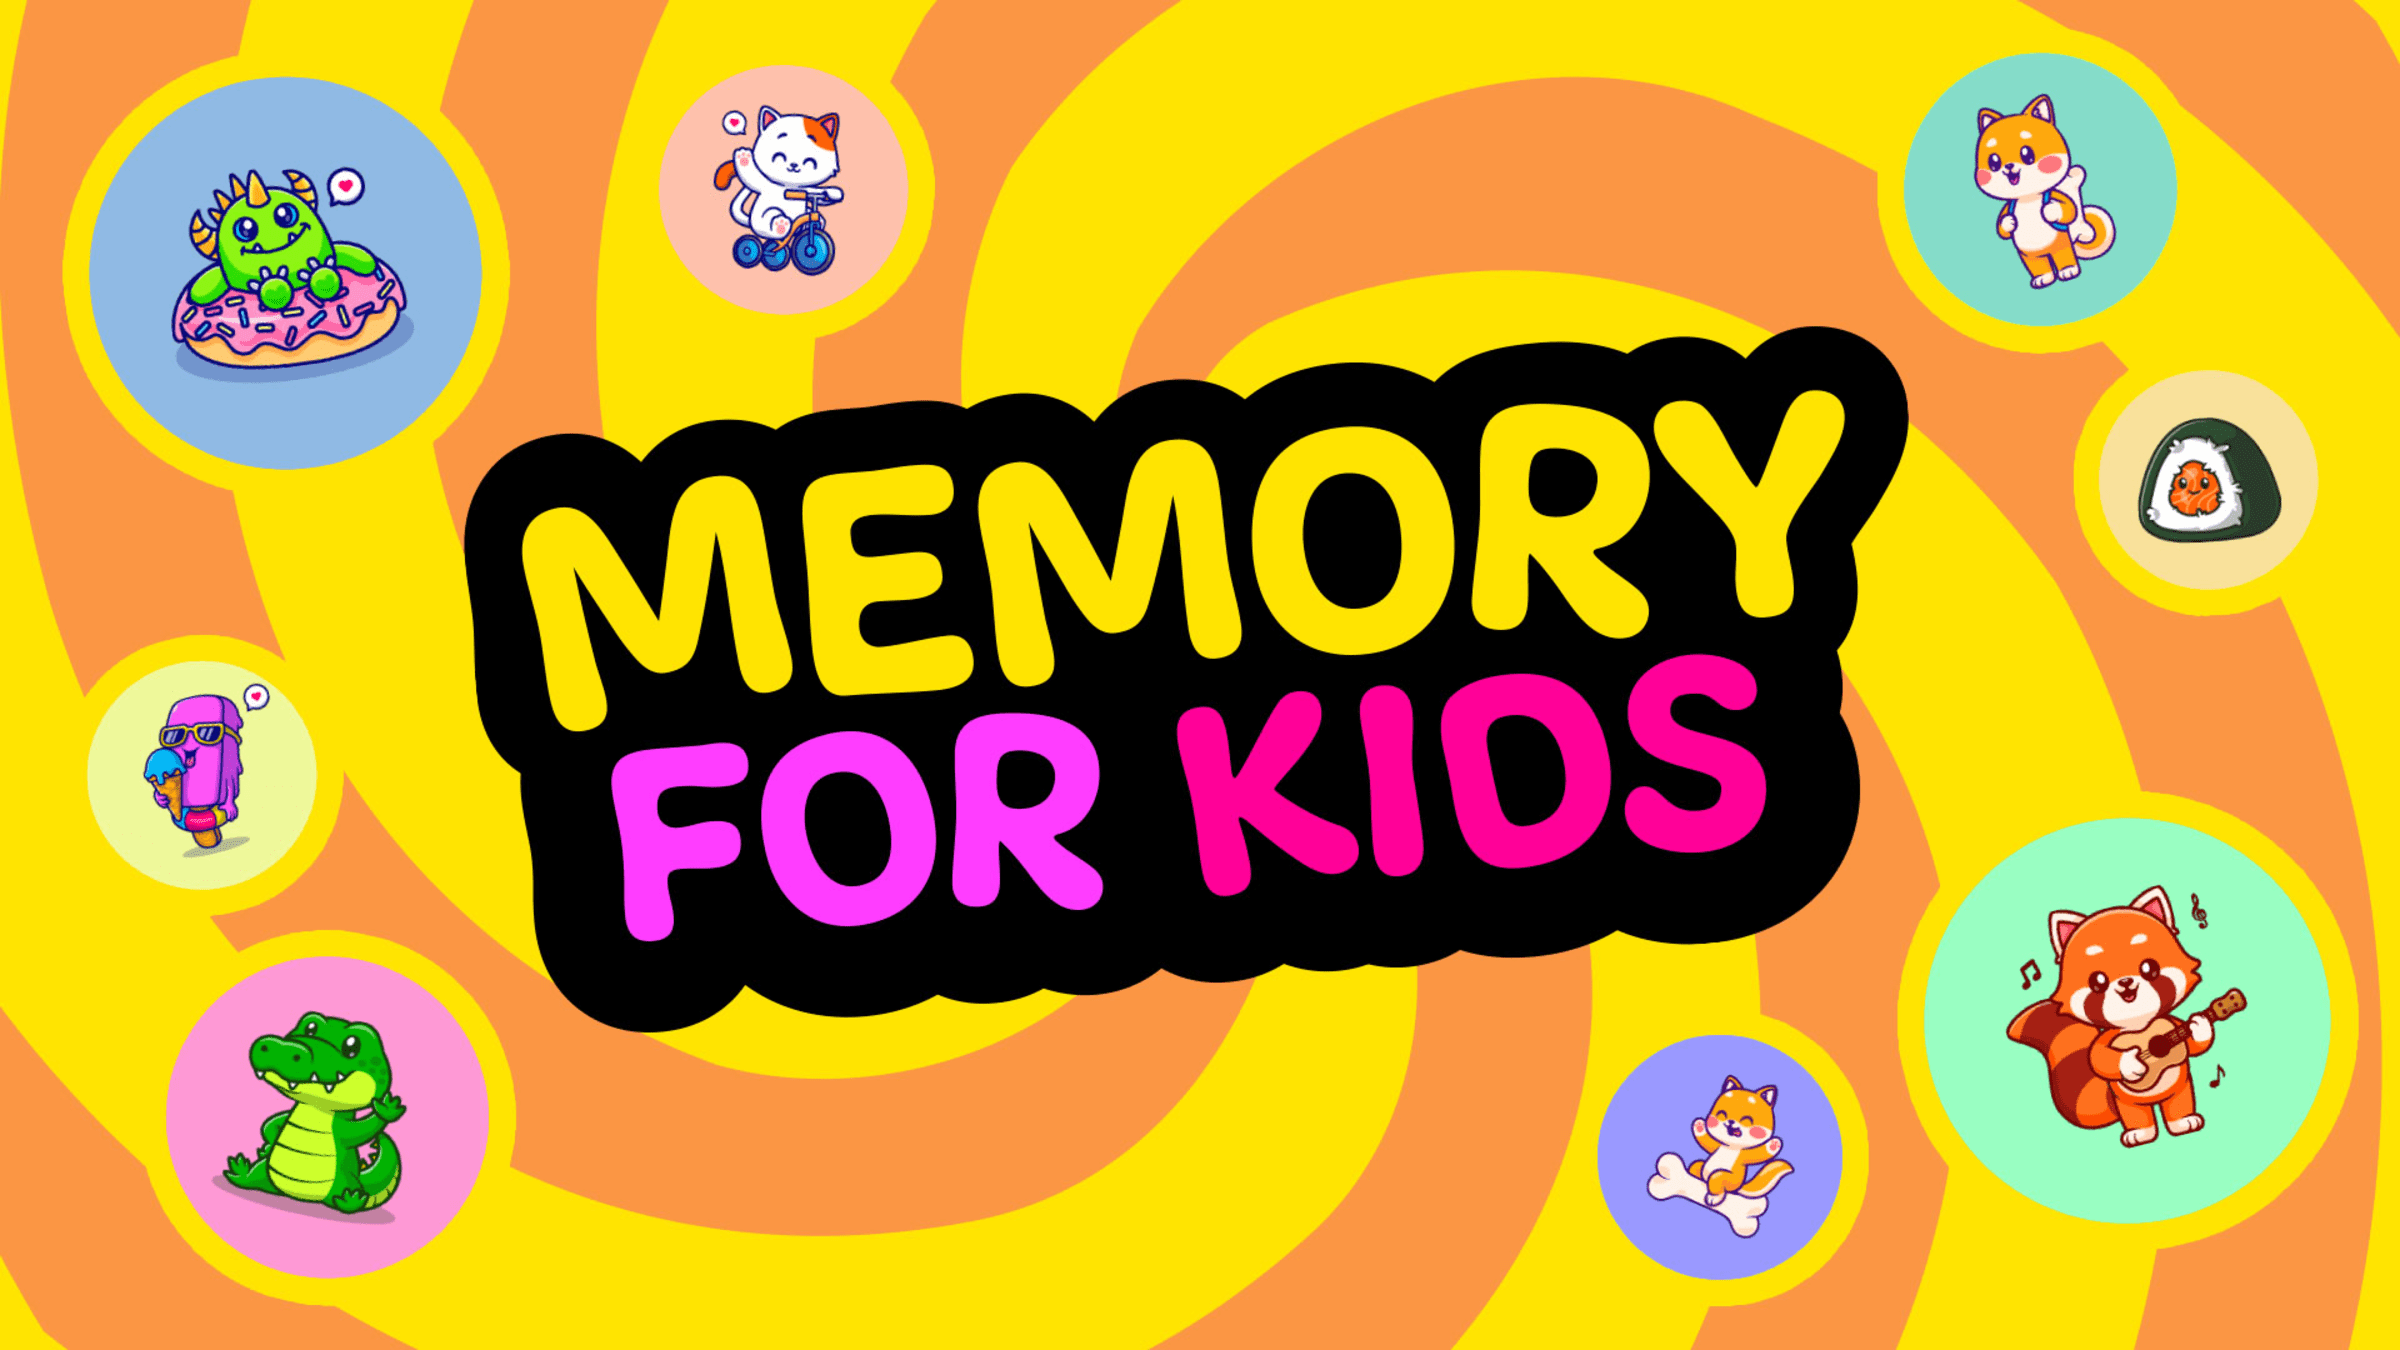 Kiddy Memory for Nintendo Switch - Nintendo Official Site